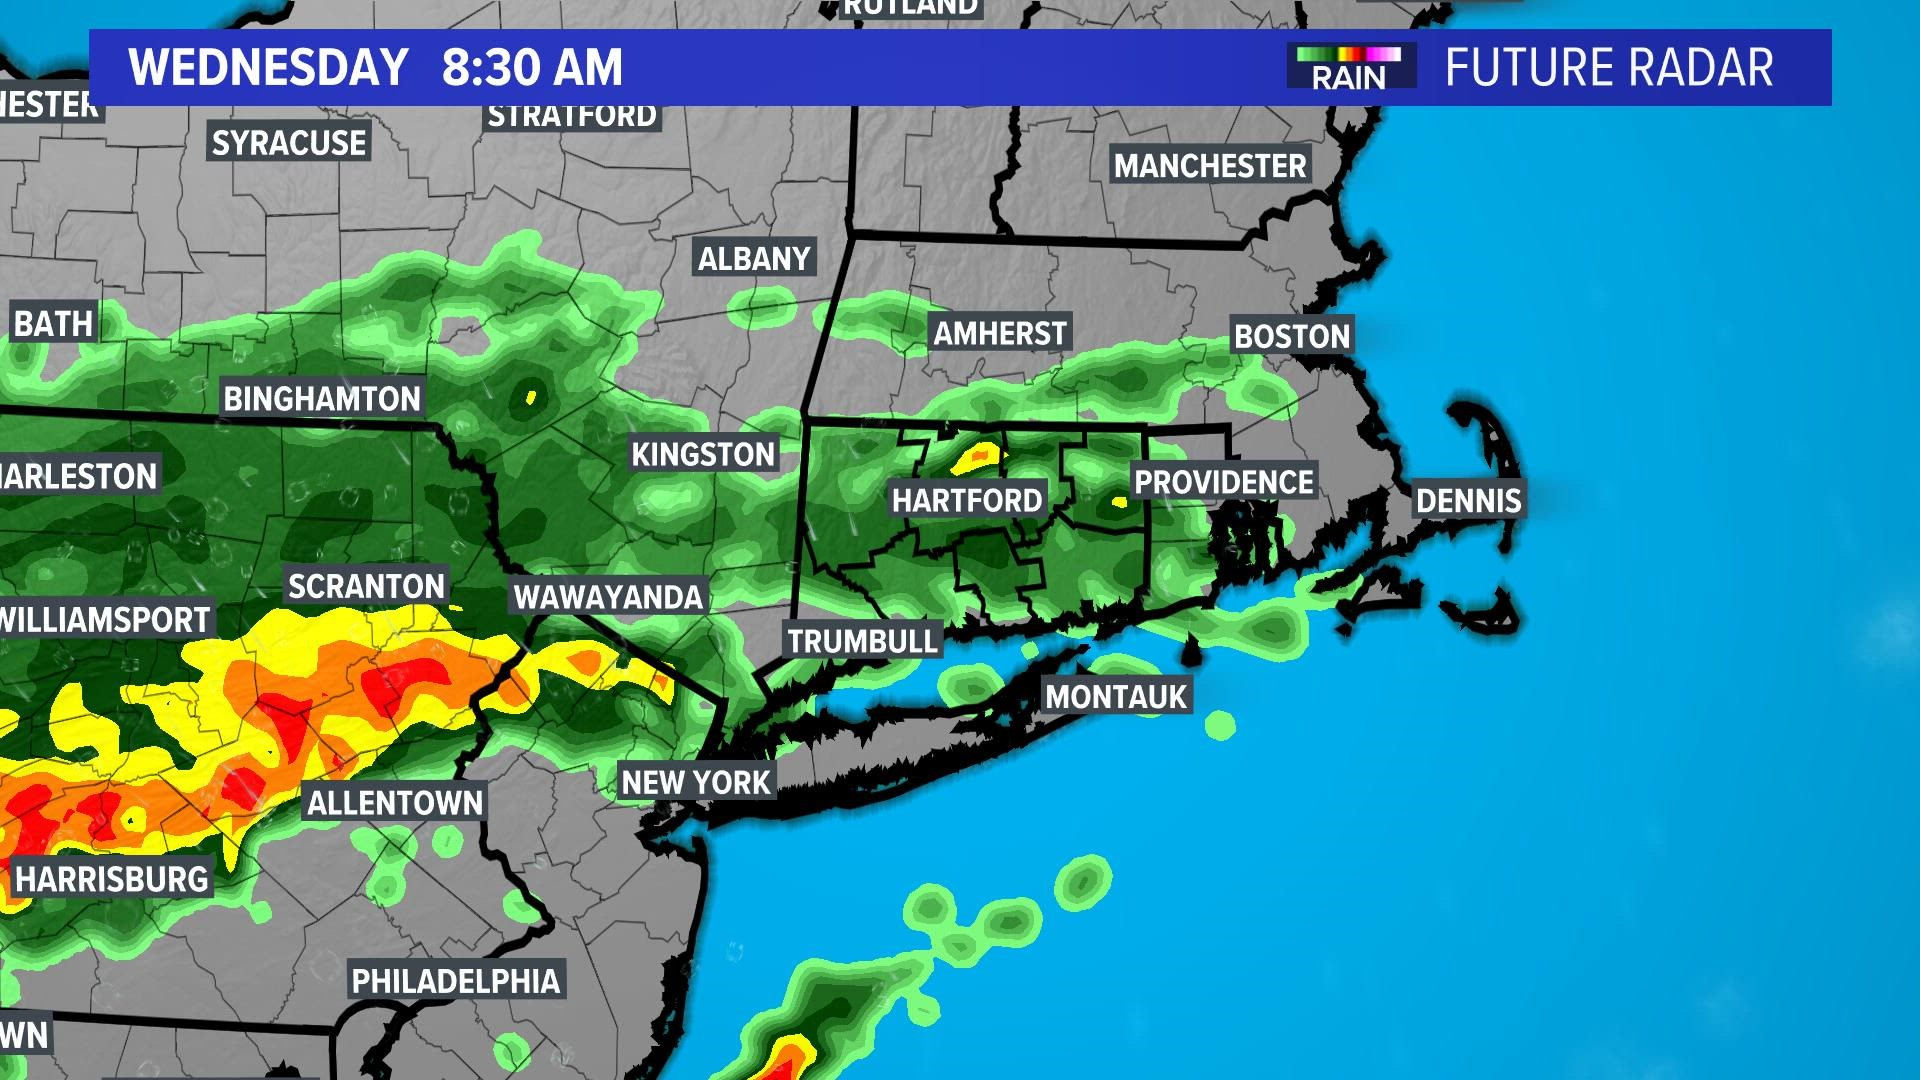 The future radar shows heavy rain and the potential for flooding as Ida's remnants move through Connecticut